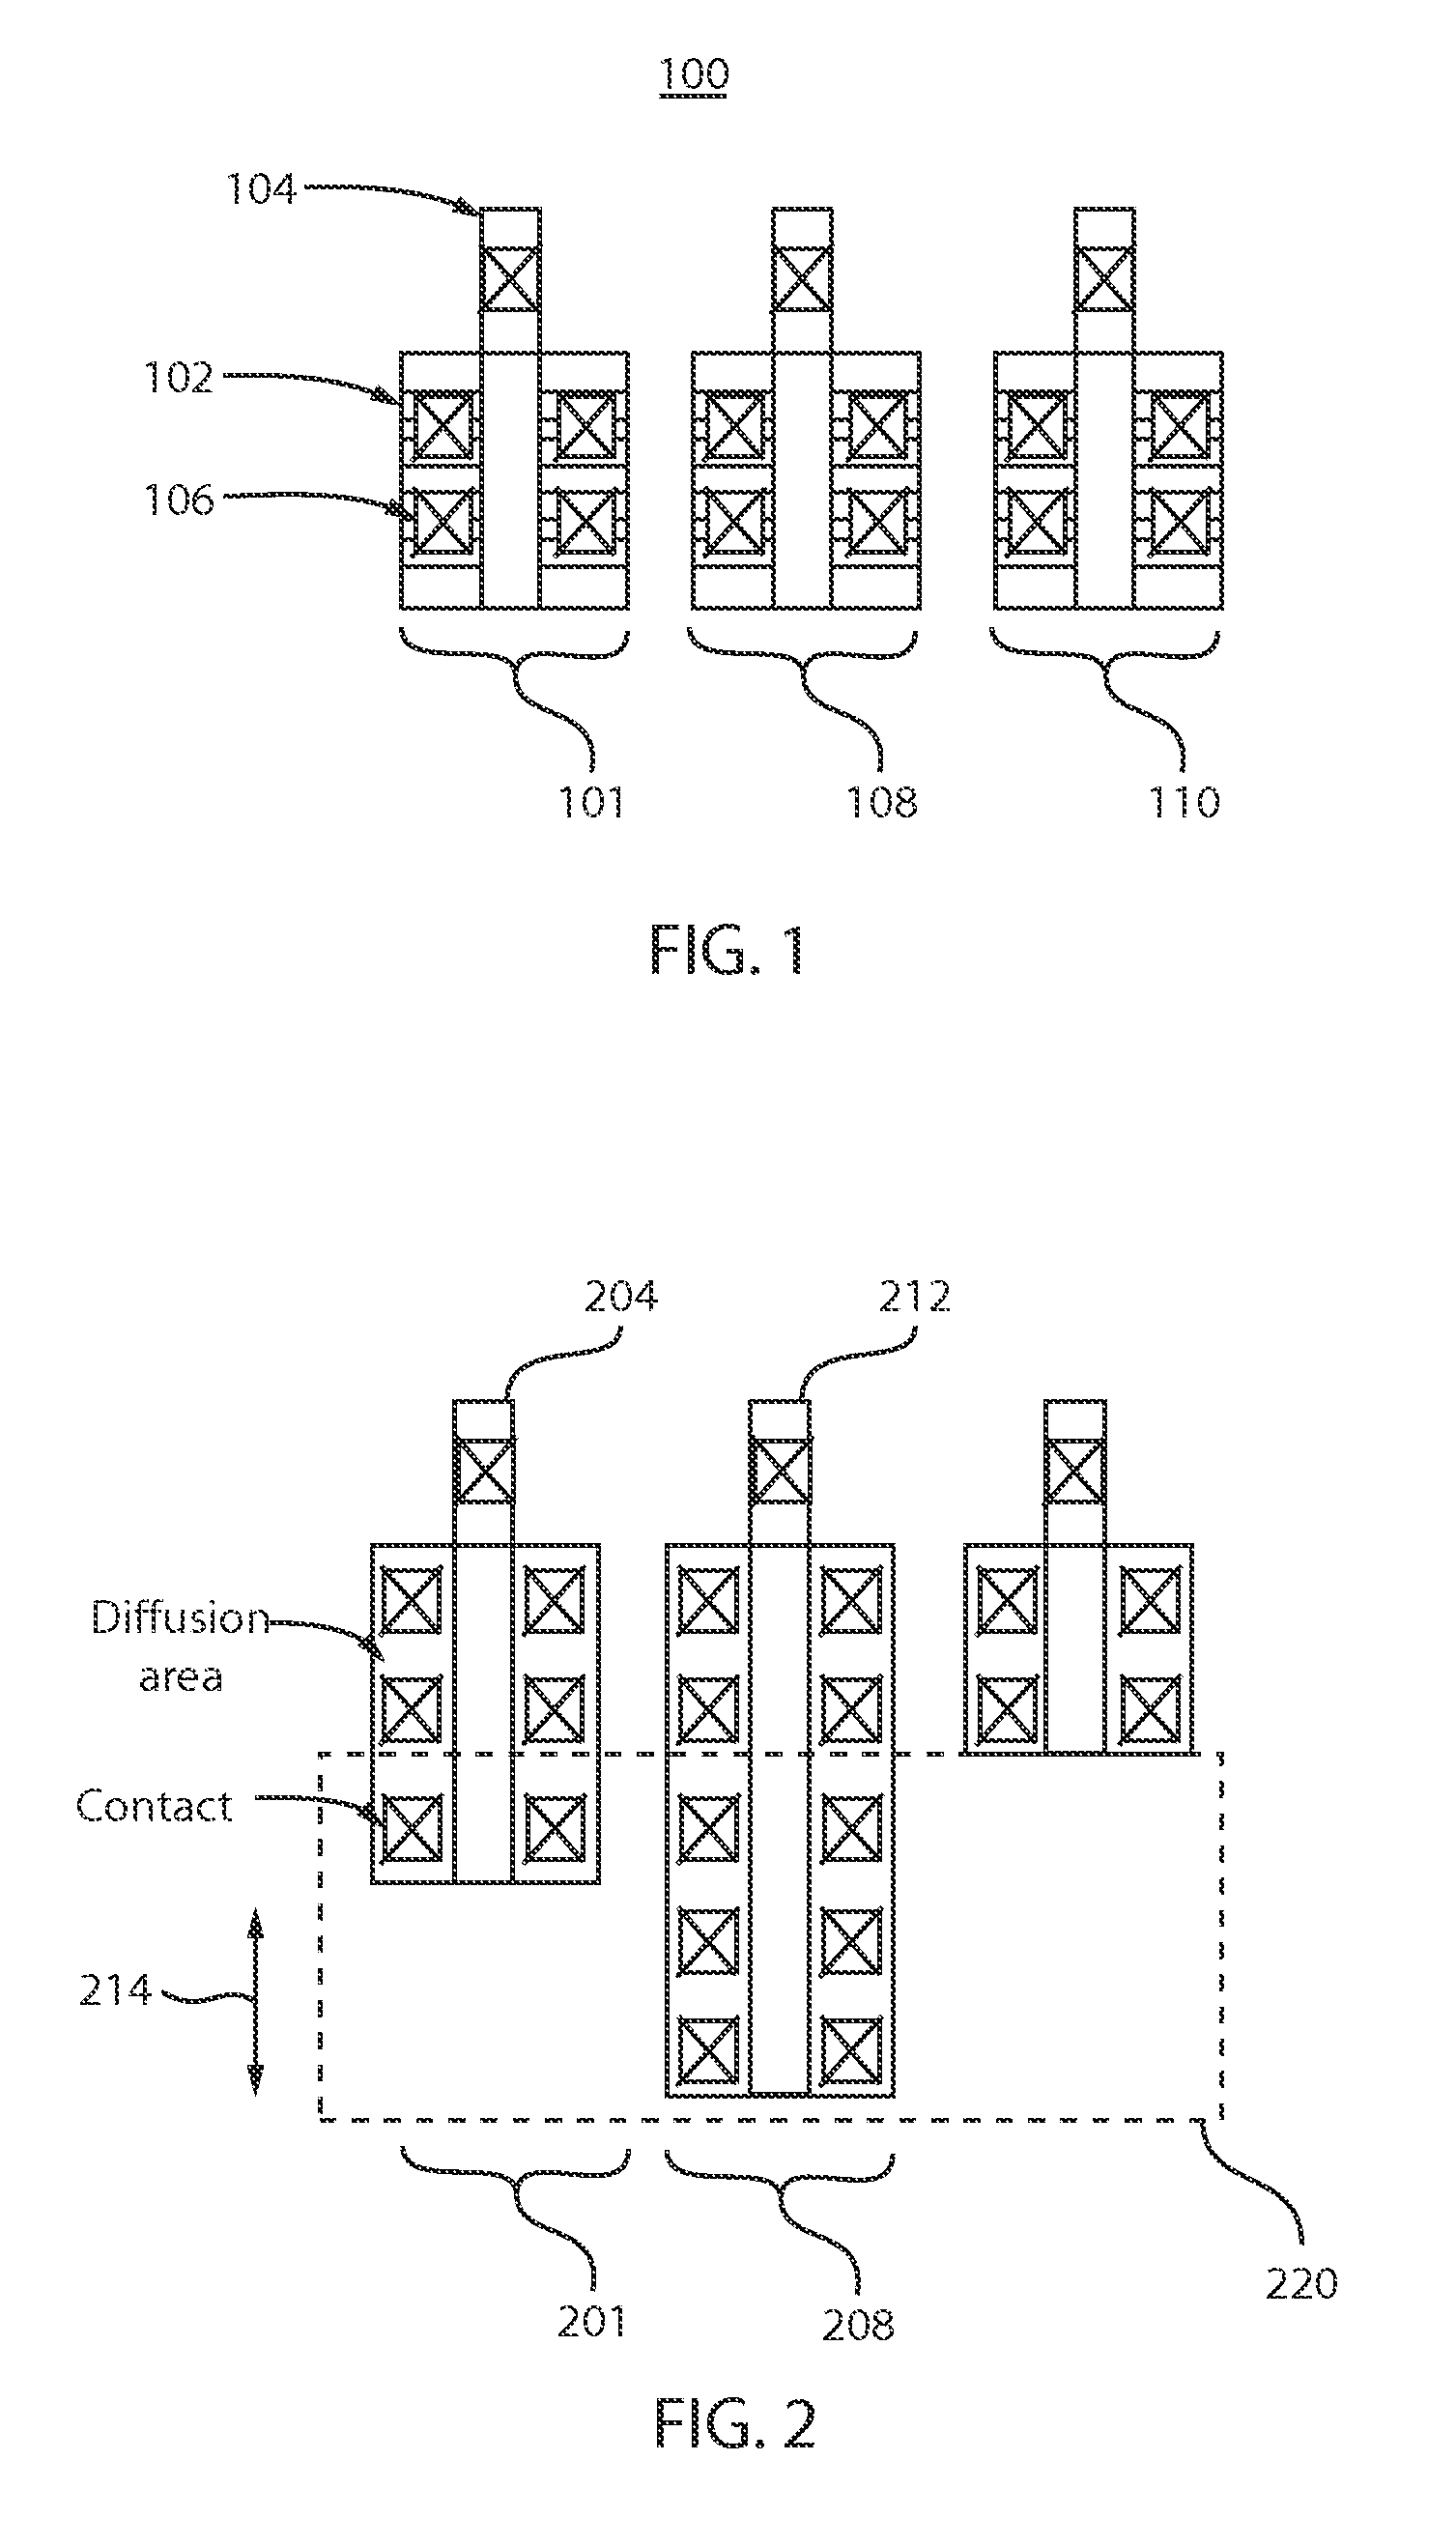 Multi-gate field-effect transistors with variable fin heights